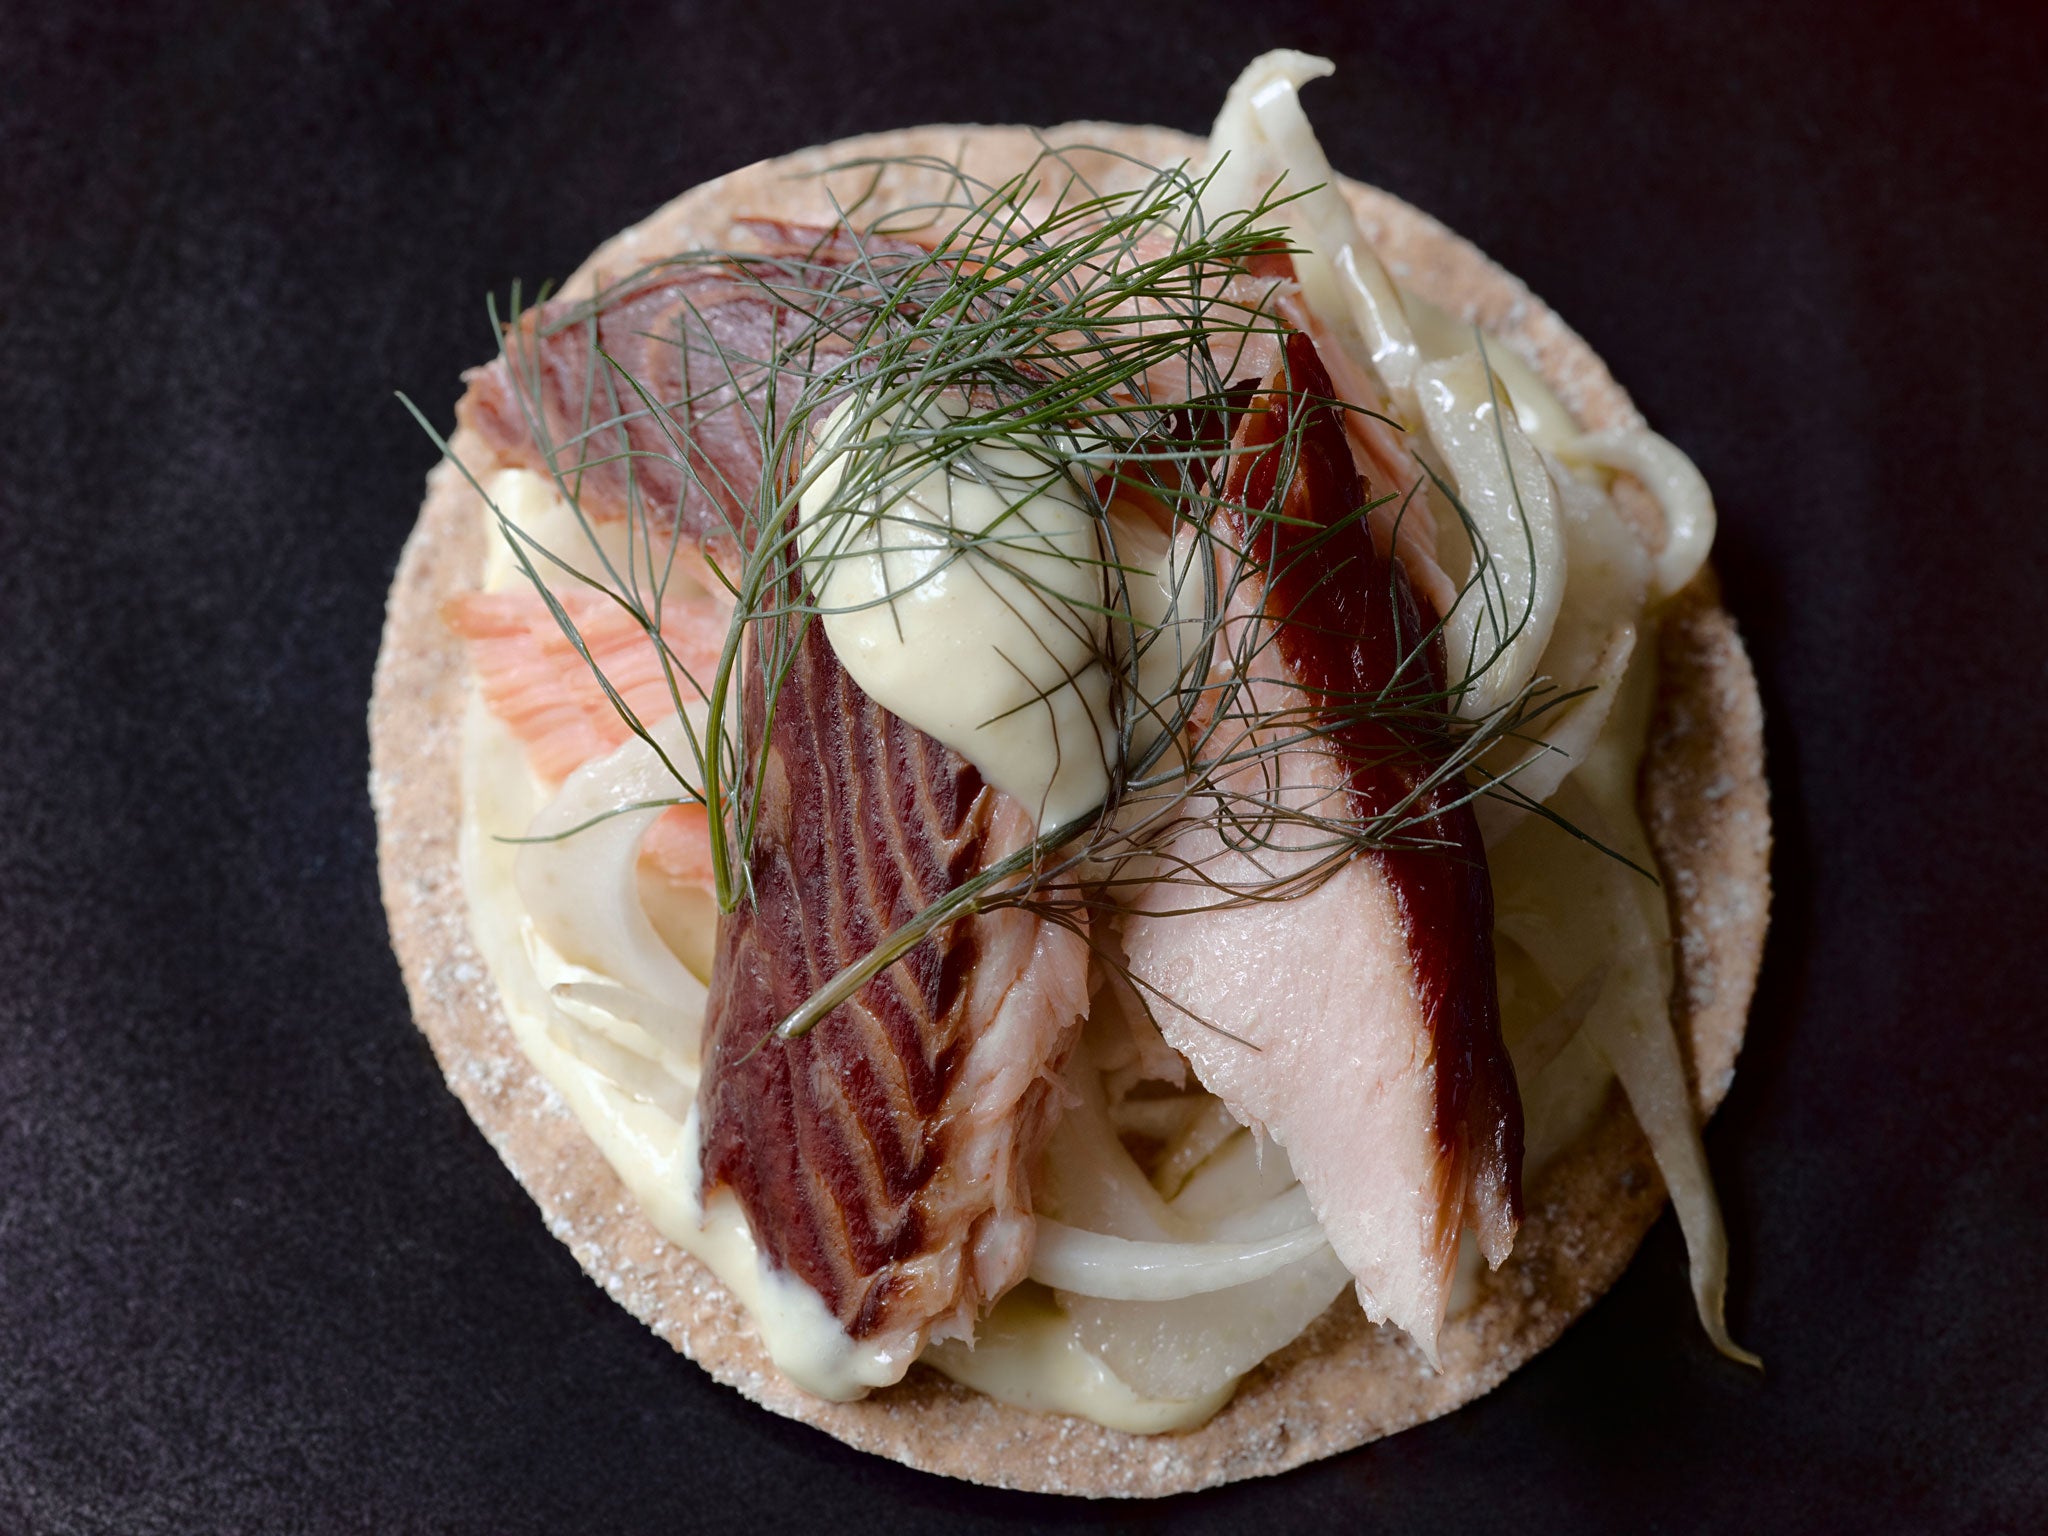 Hot-smoked salmon with pickled fennel and horseradish